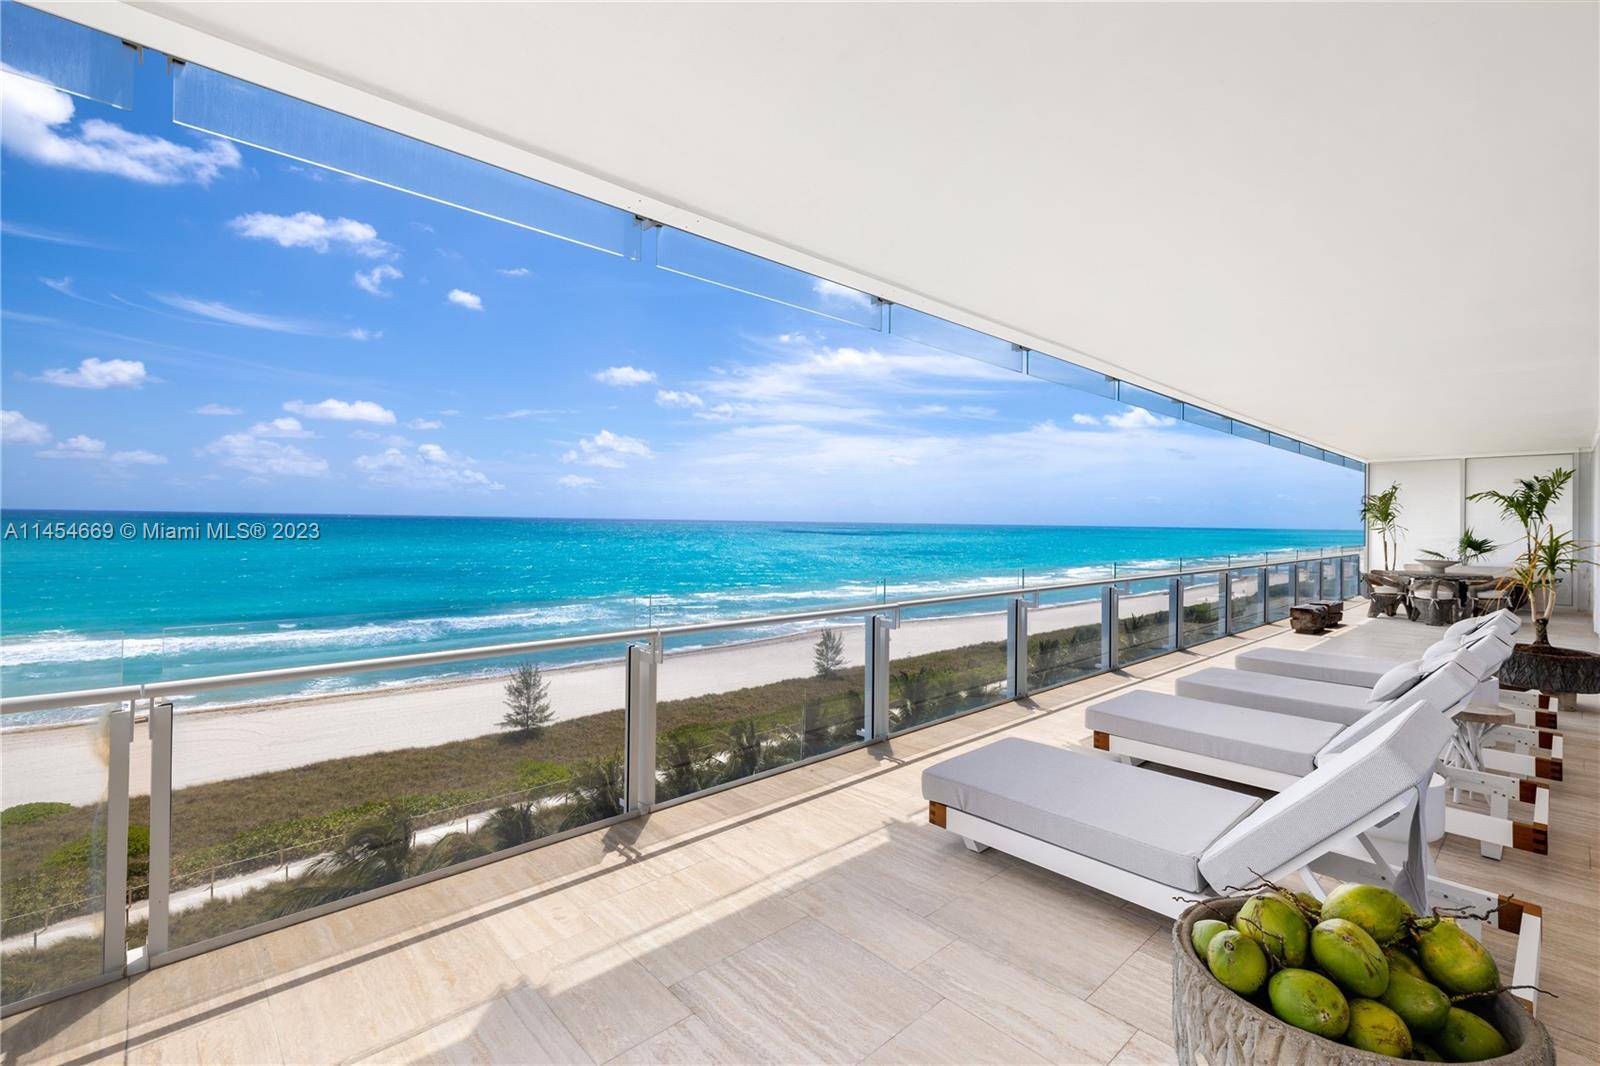 Relish in old world charm of The Surf Club and enjoy state of the art Four Seasons hospitality in this exclusive, rare corner residence with architectural design by Richard Meier ...